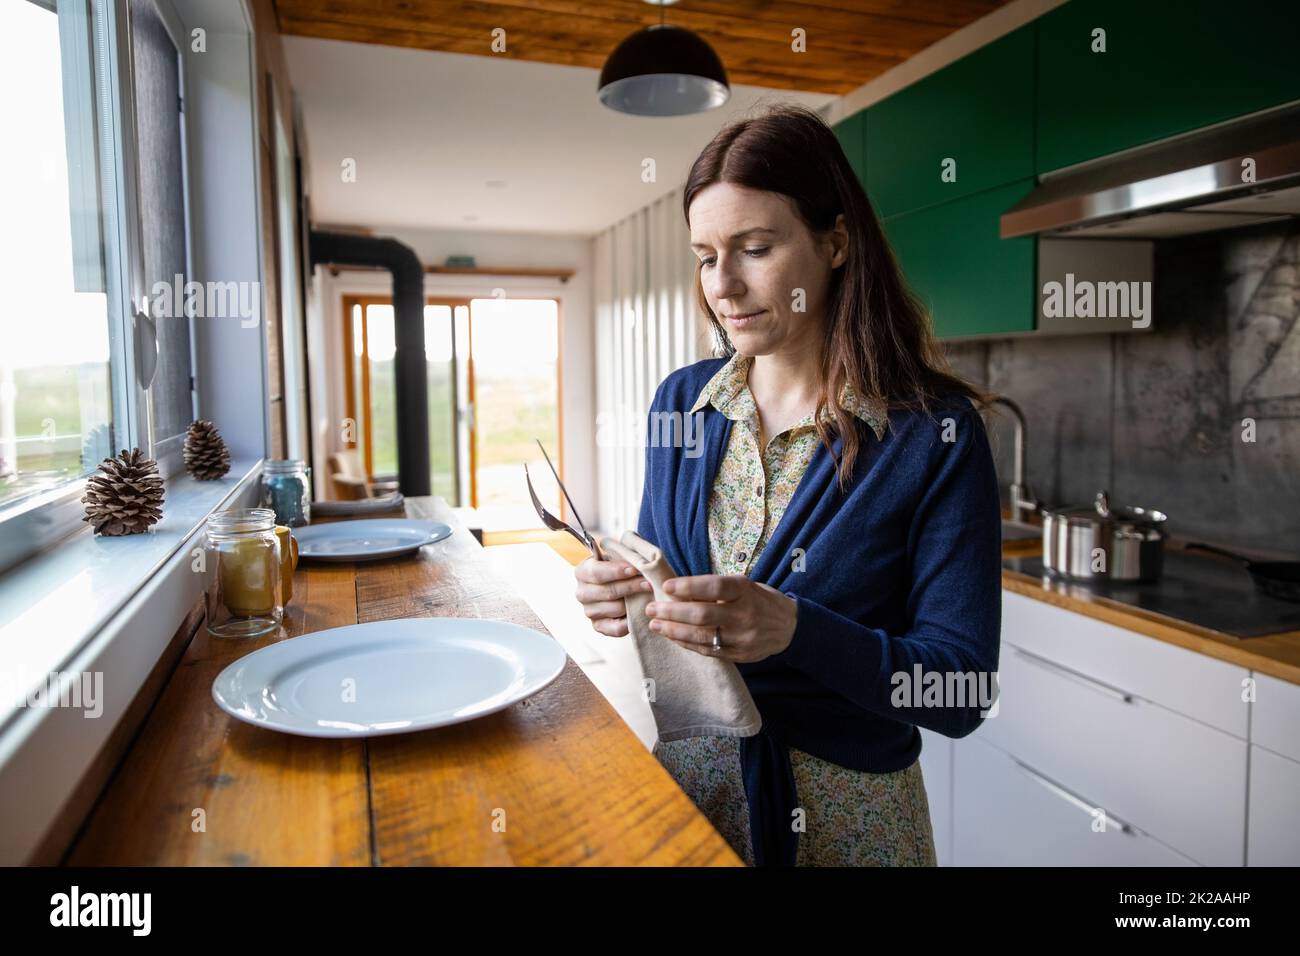 Woman holding serviette in small rustic kitchen Stock Photo